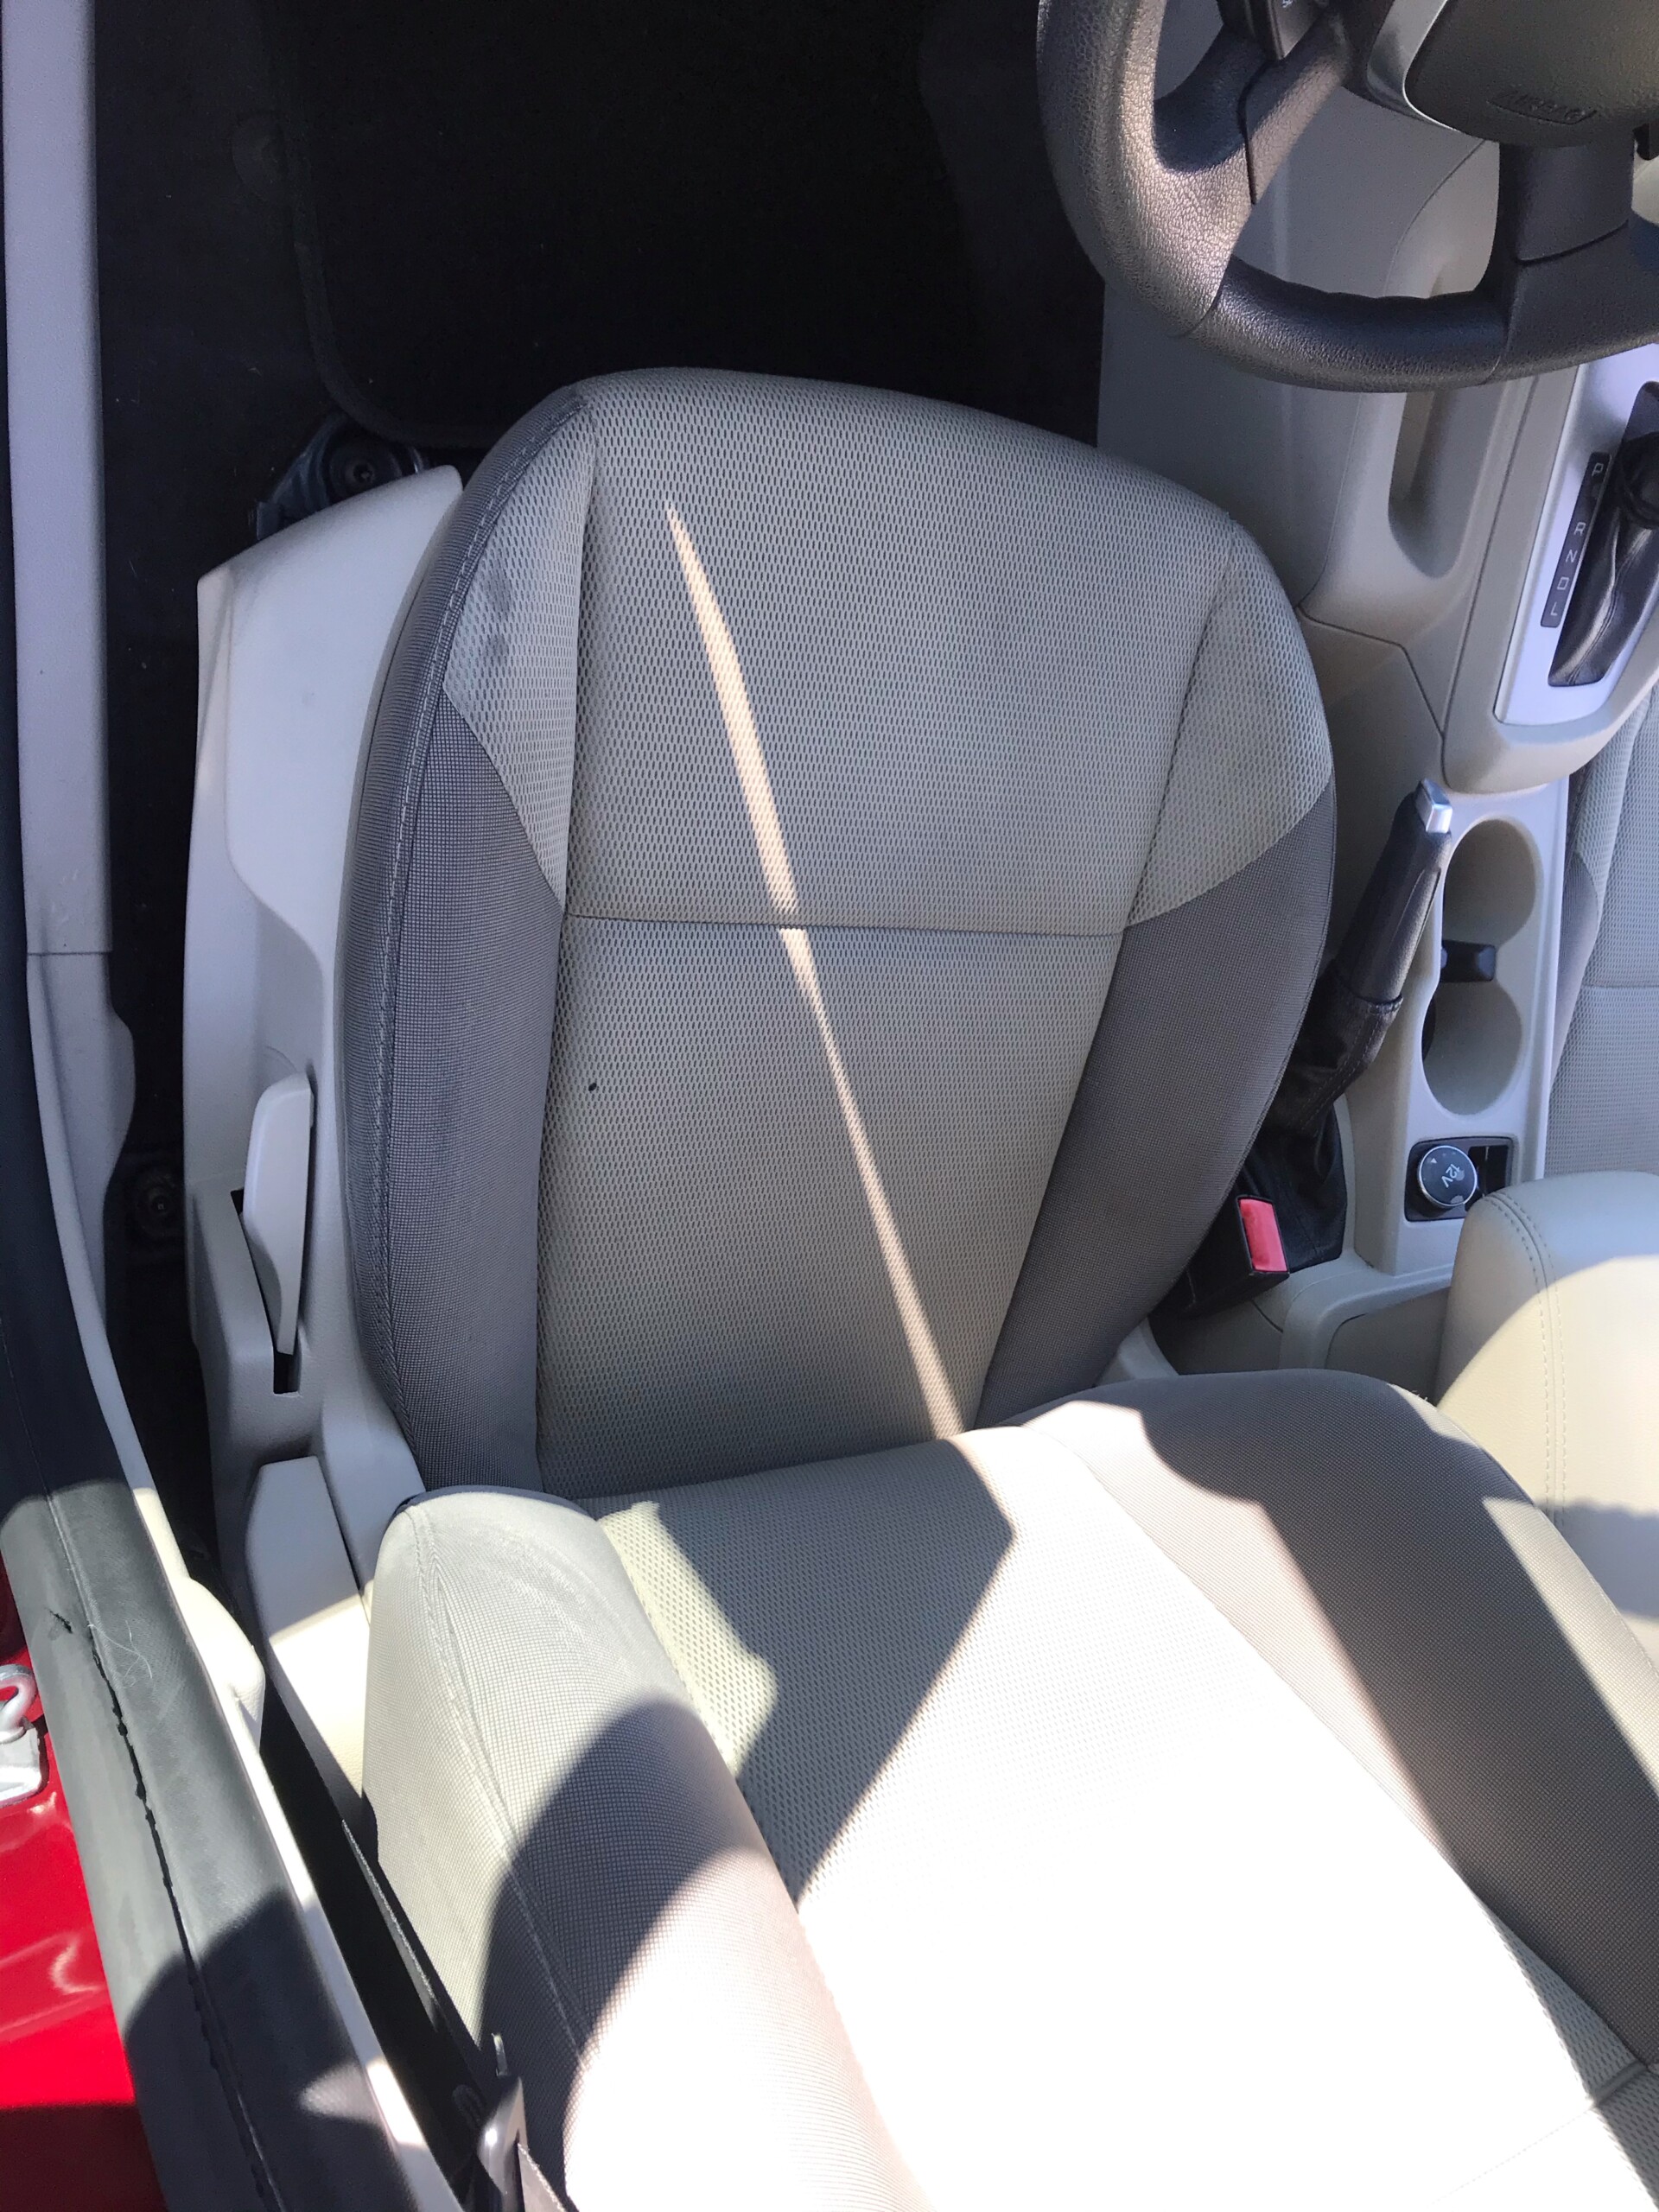 2013 Ford Focus seat 1 after